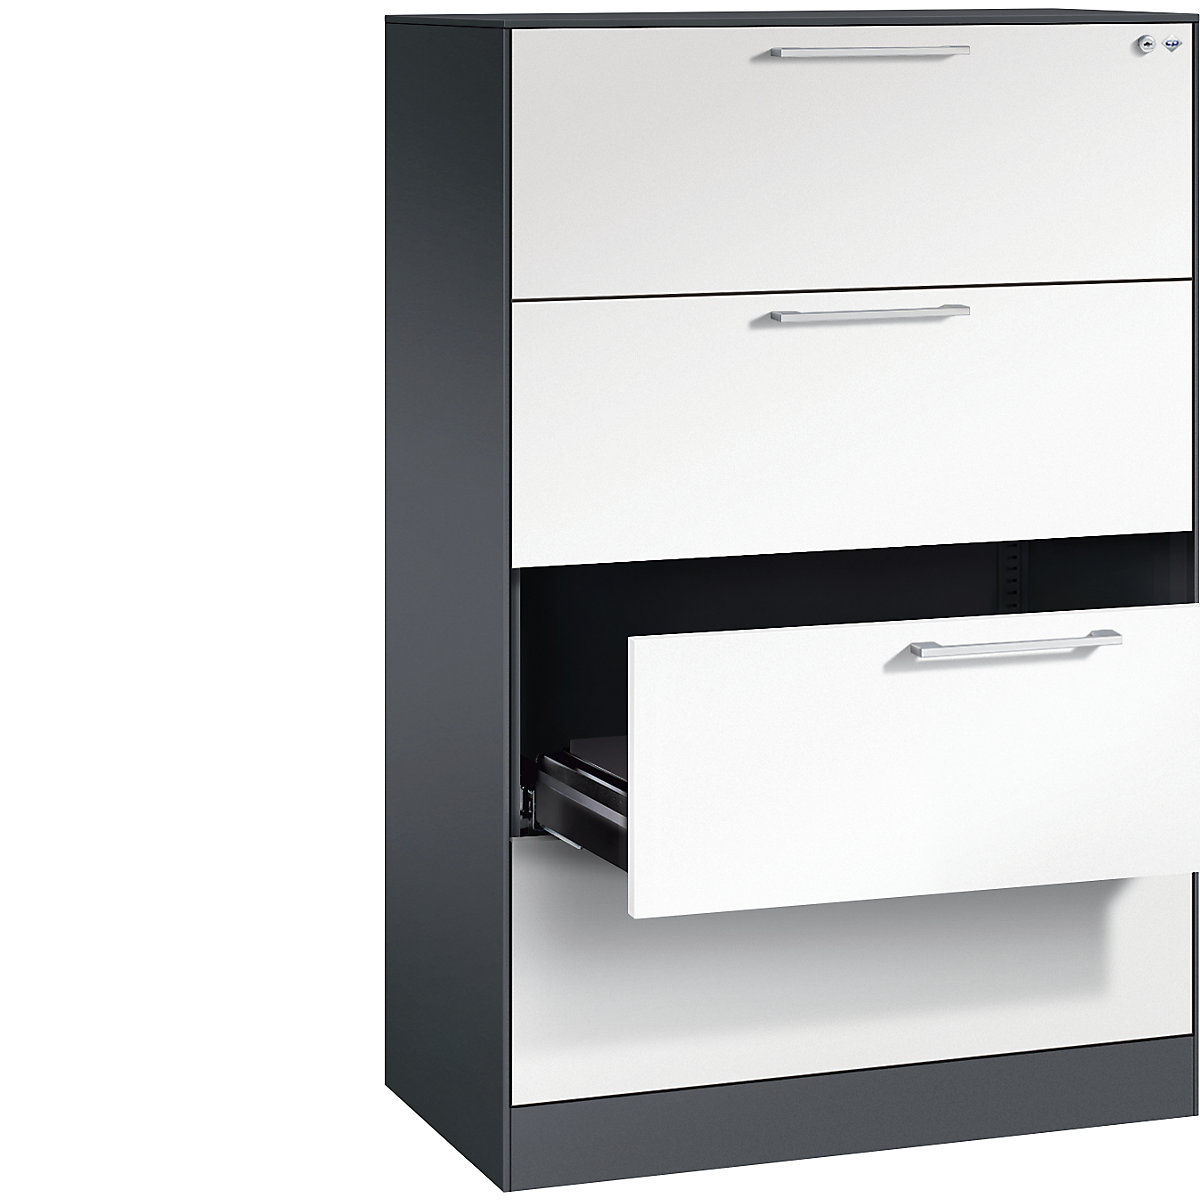 ASISTO card file cabinet – C+P, height 1292 mm, with 4 drawers, A4 landscape, black grey/white-13